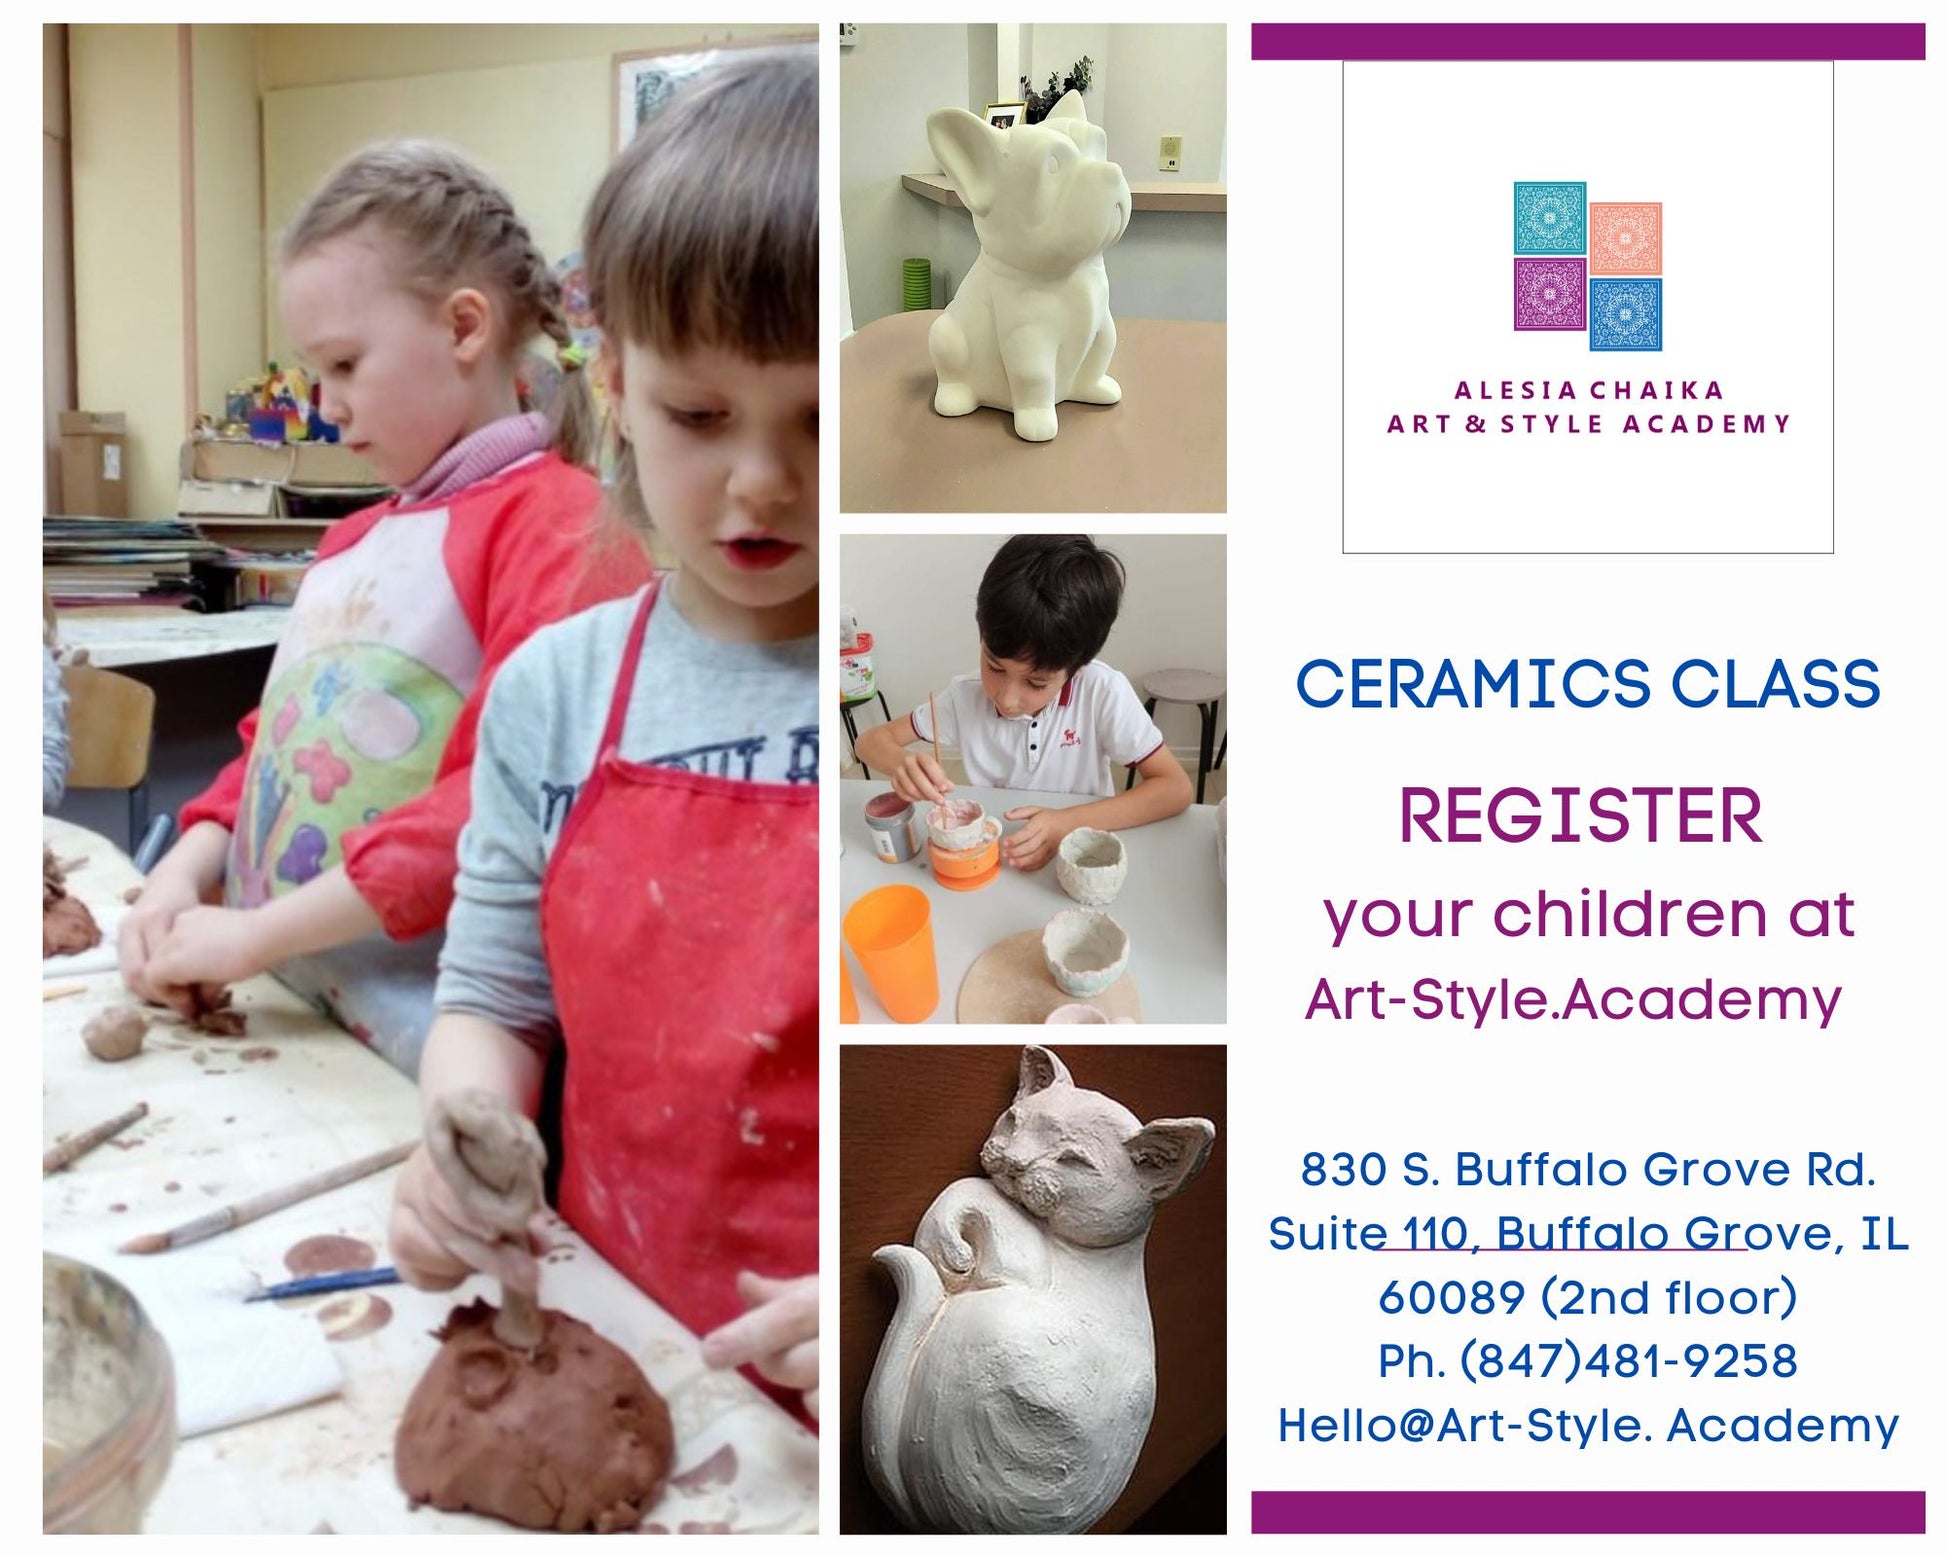 Ceramic Class for children and kids and adults in Chicago, Buffalo Grove, Northbrook, Palatine, Arlington heghts at Alesia chaika Art & Style Academy